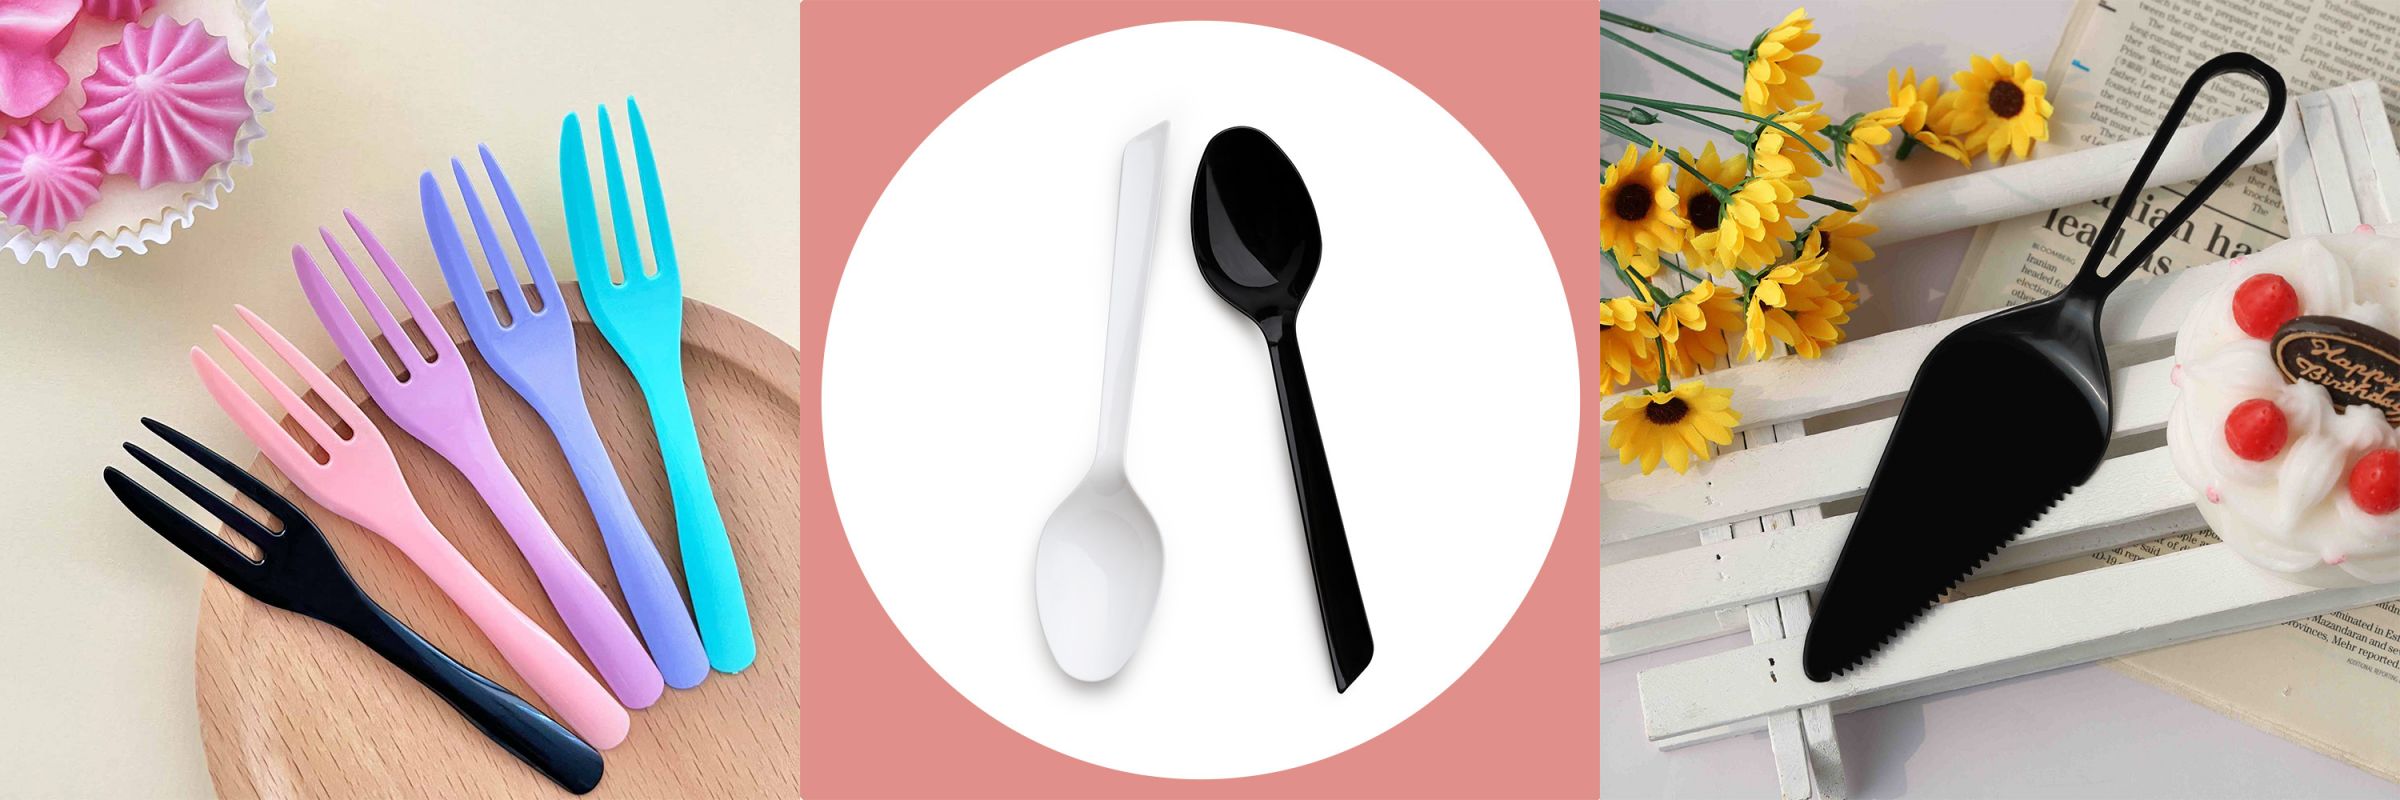 Three plastic cutlery from TAIR CHU, tested for dishwasher durability, can be machine washed at least 125 times.